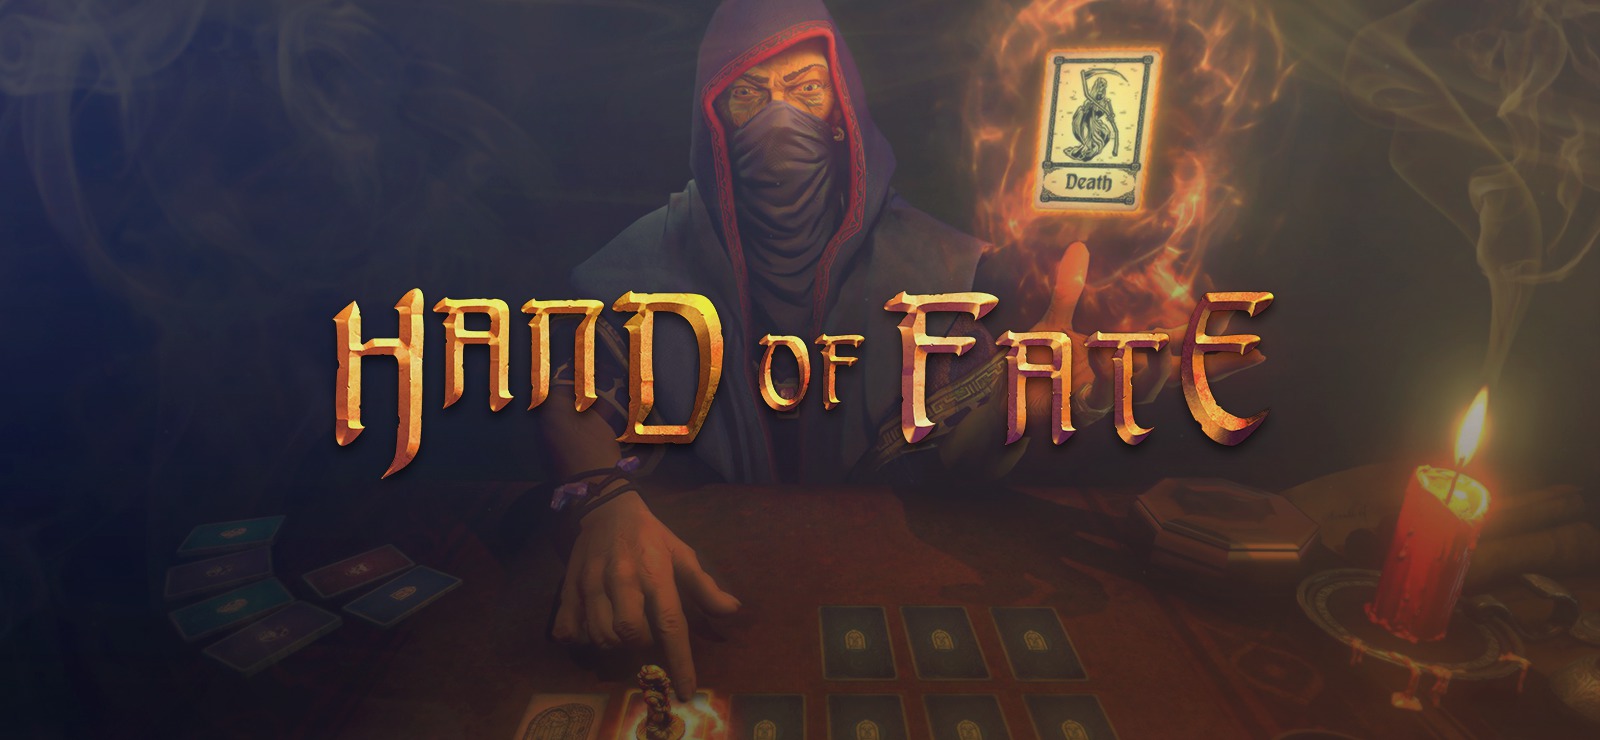 not geetting hand of fate quest